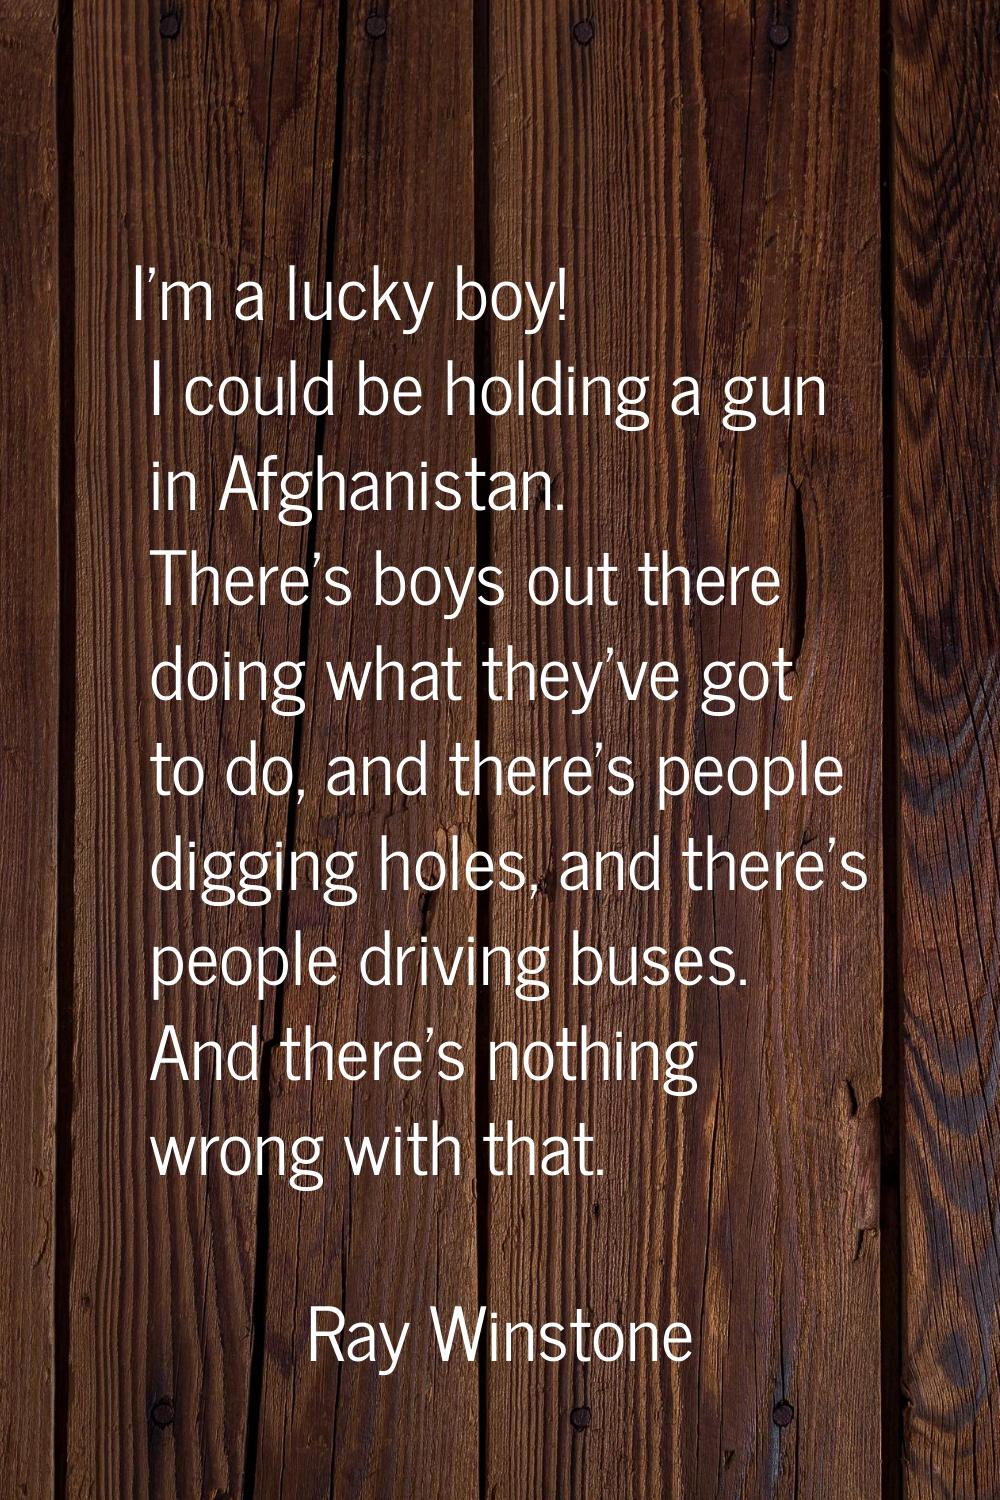 I'm a lucky boy! I could be holding a gun in Afghanistan. There's boys out there doing what they've